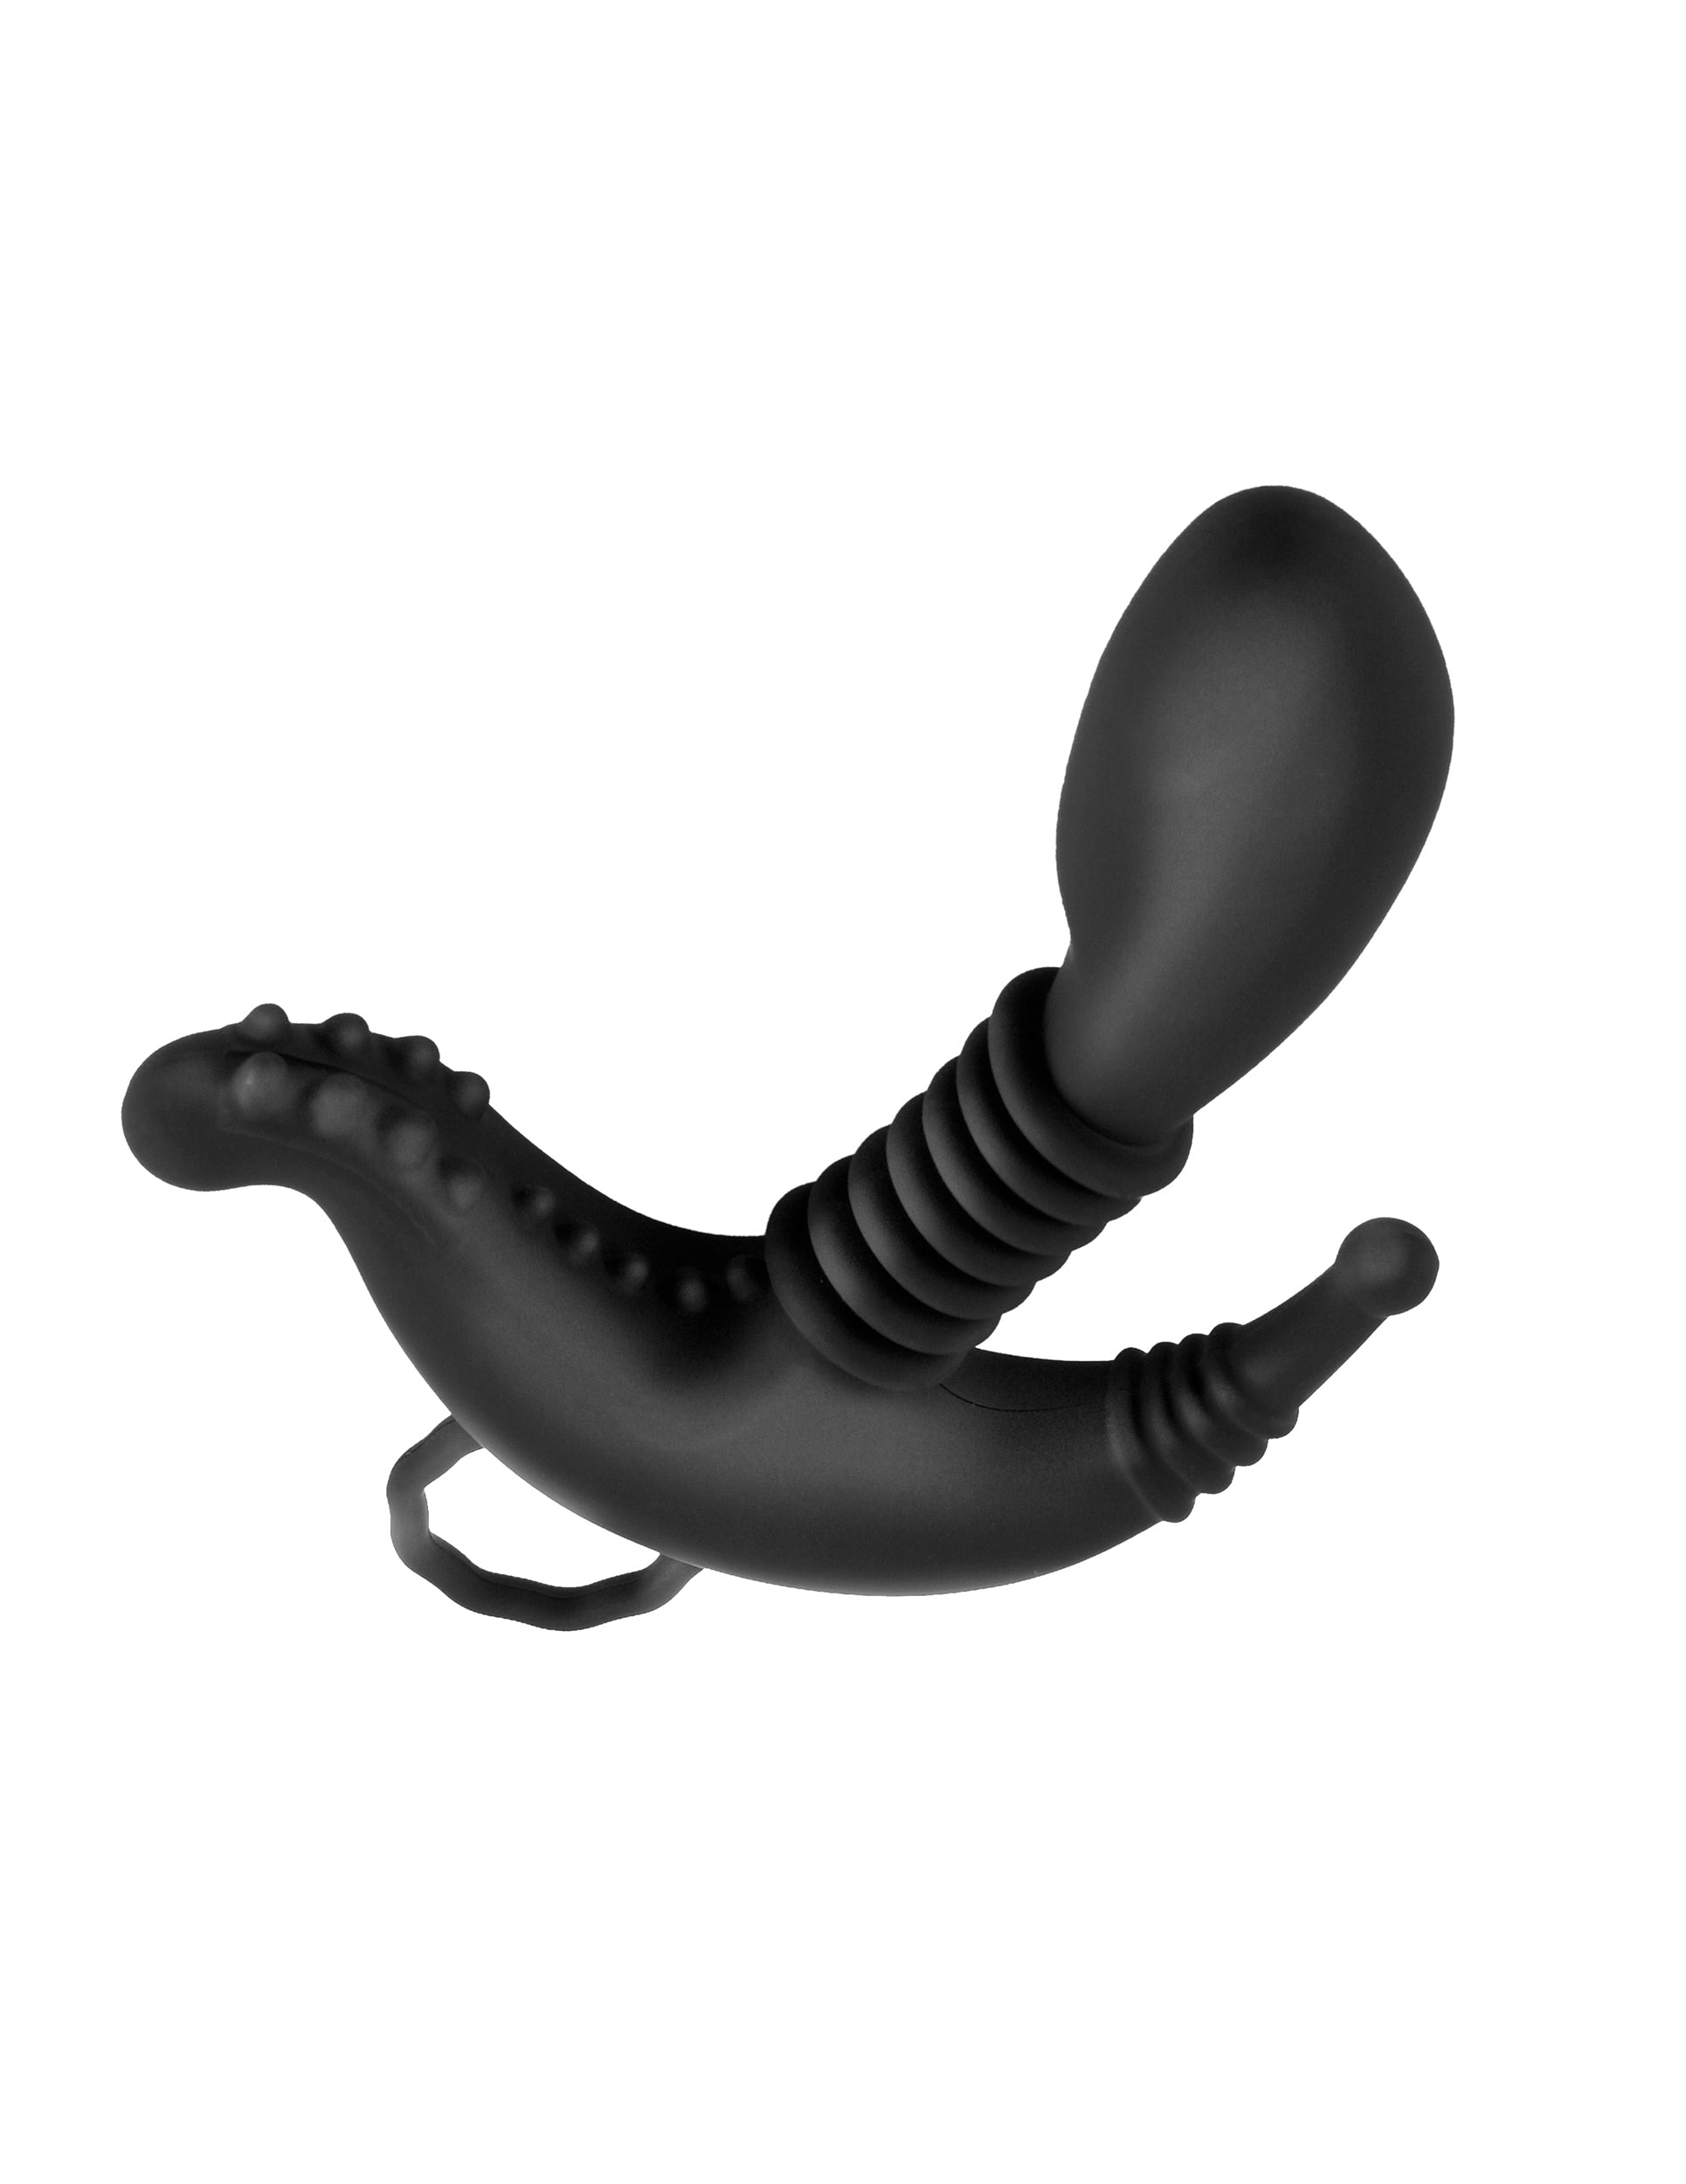 Anal Fantasy Collection Beginner - - Prostate Toys s Prostate Stimulator - - Prostate Toys